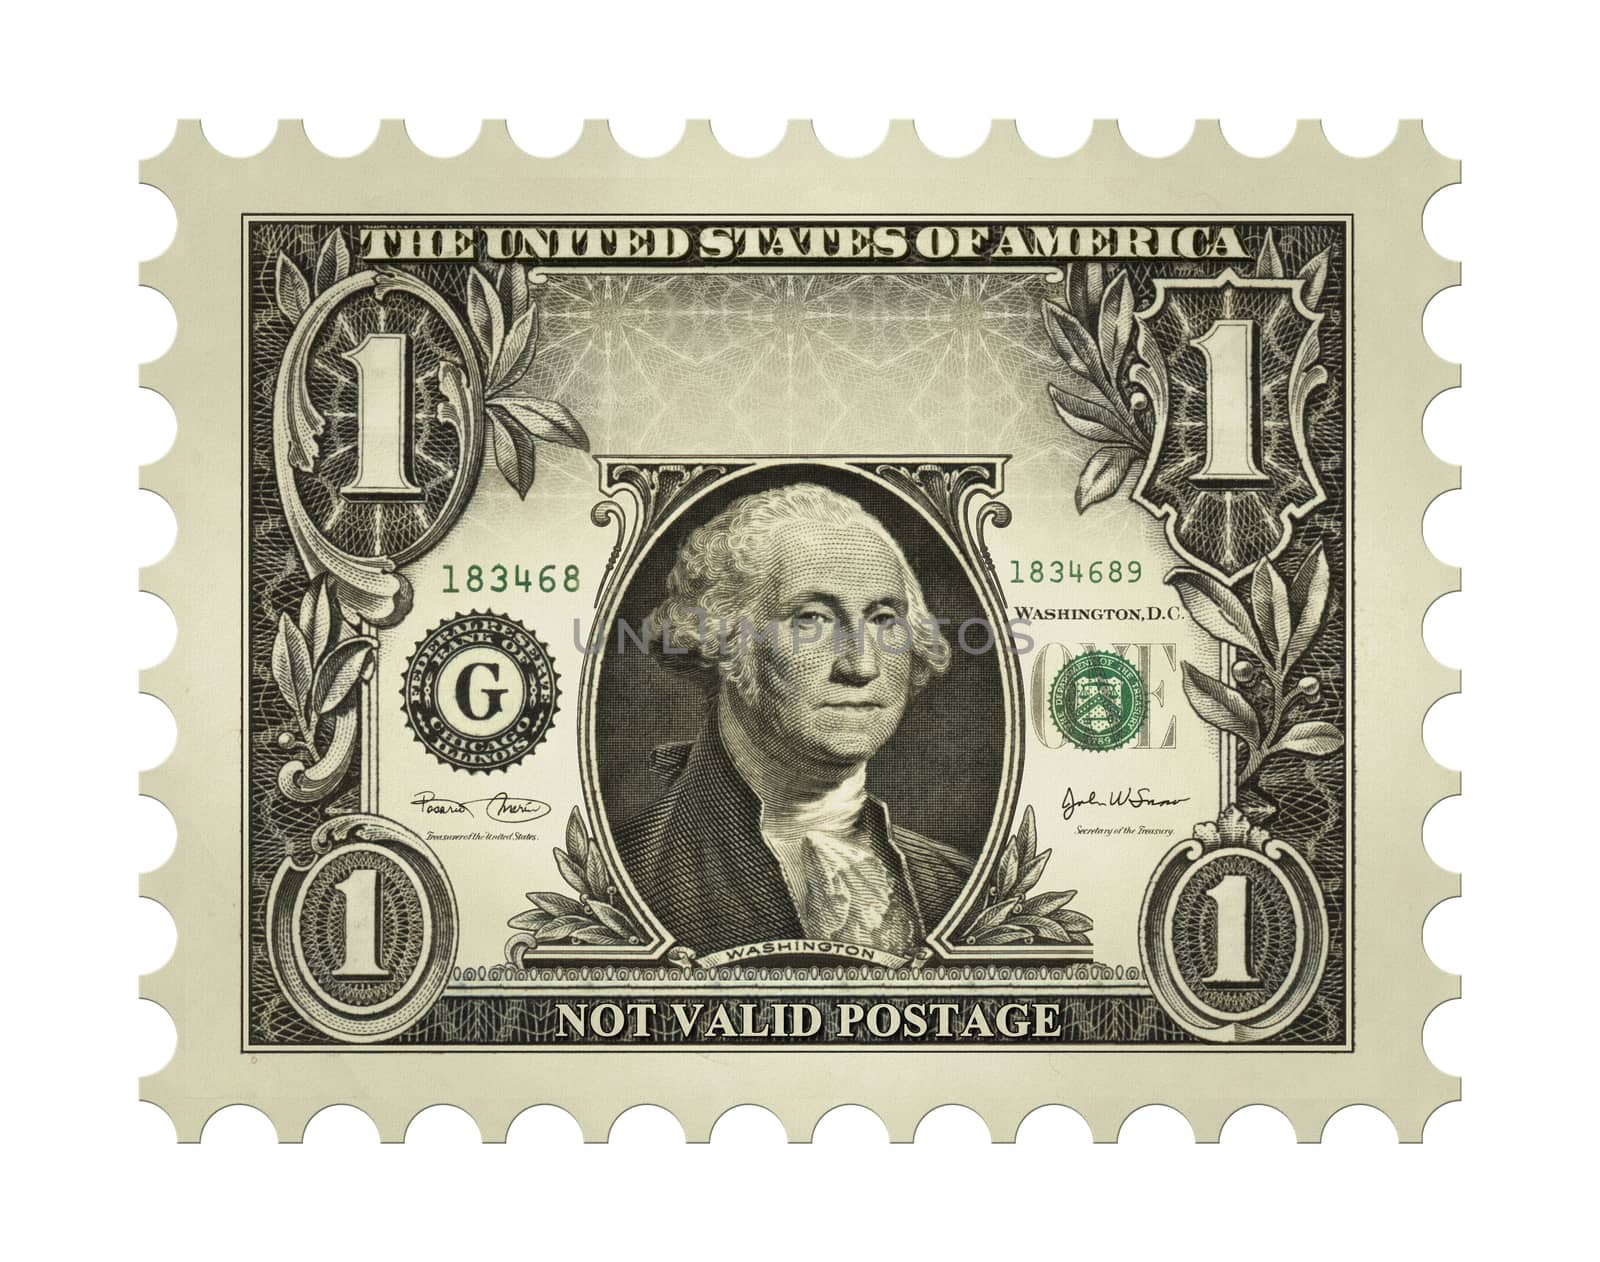 Photo-Illustration using a one dollar bill retouched and re-illustrated to create a faux postage stamp.